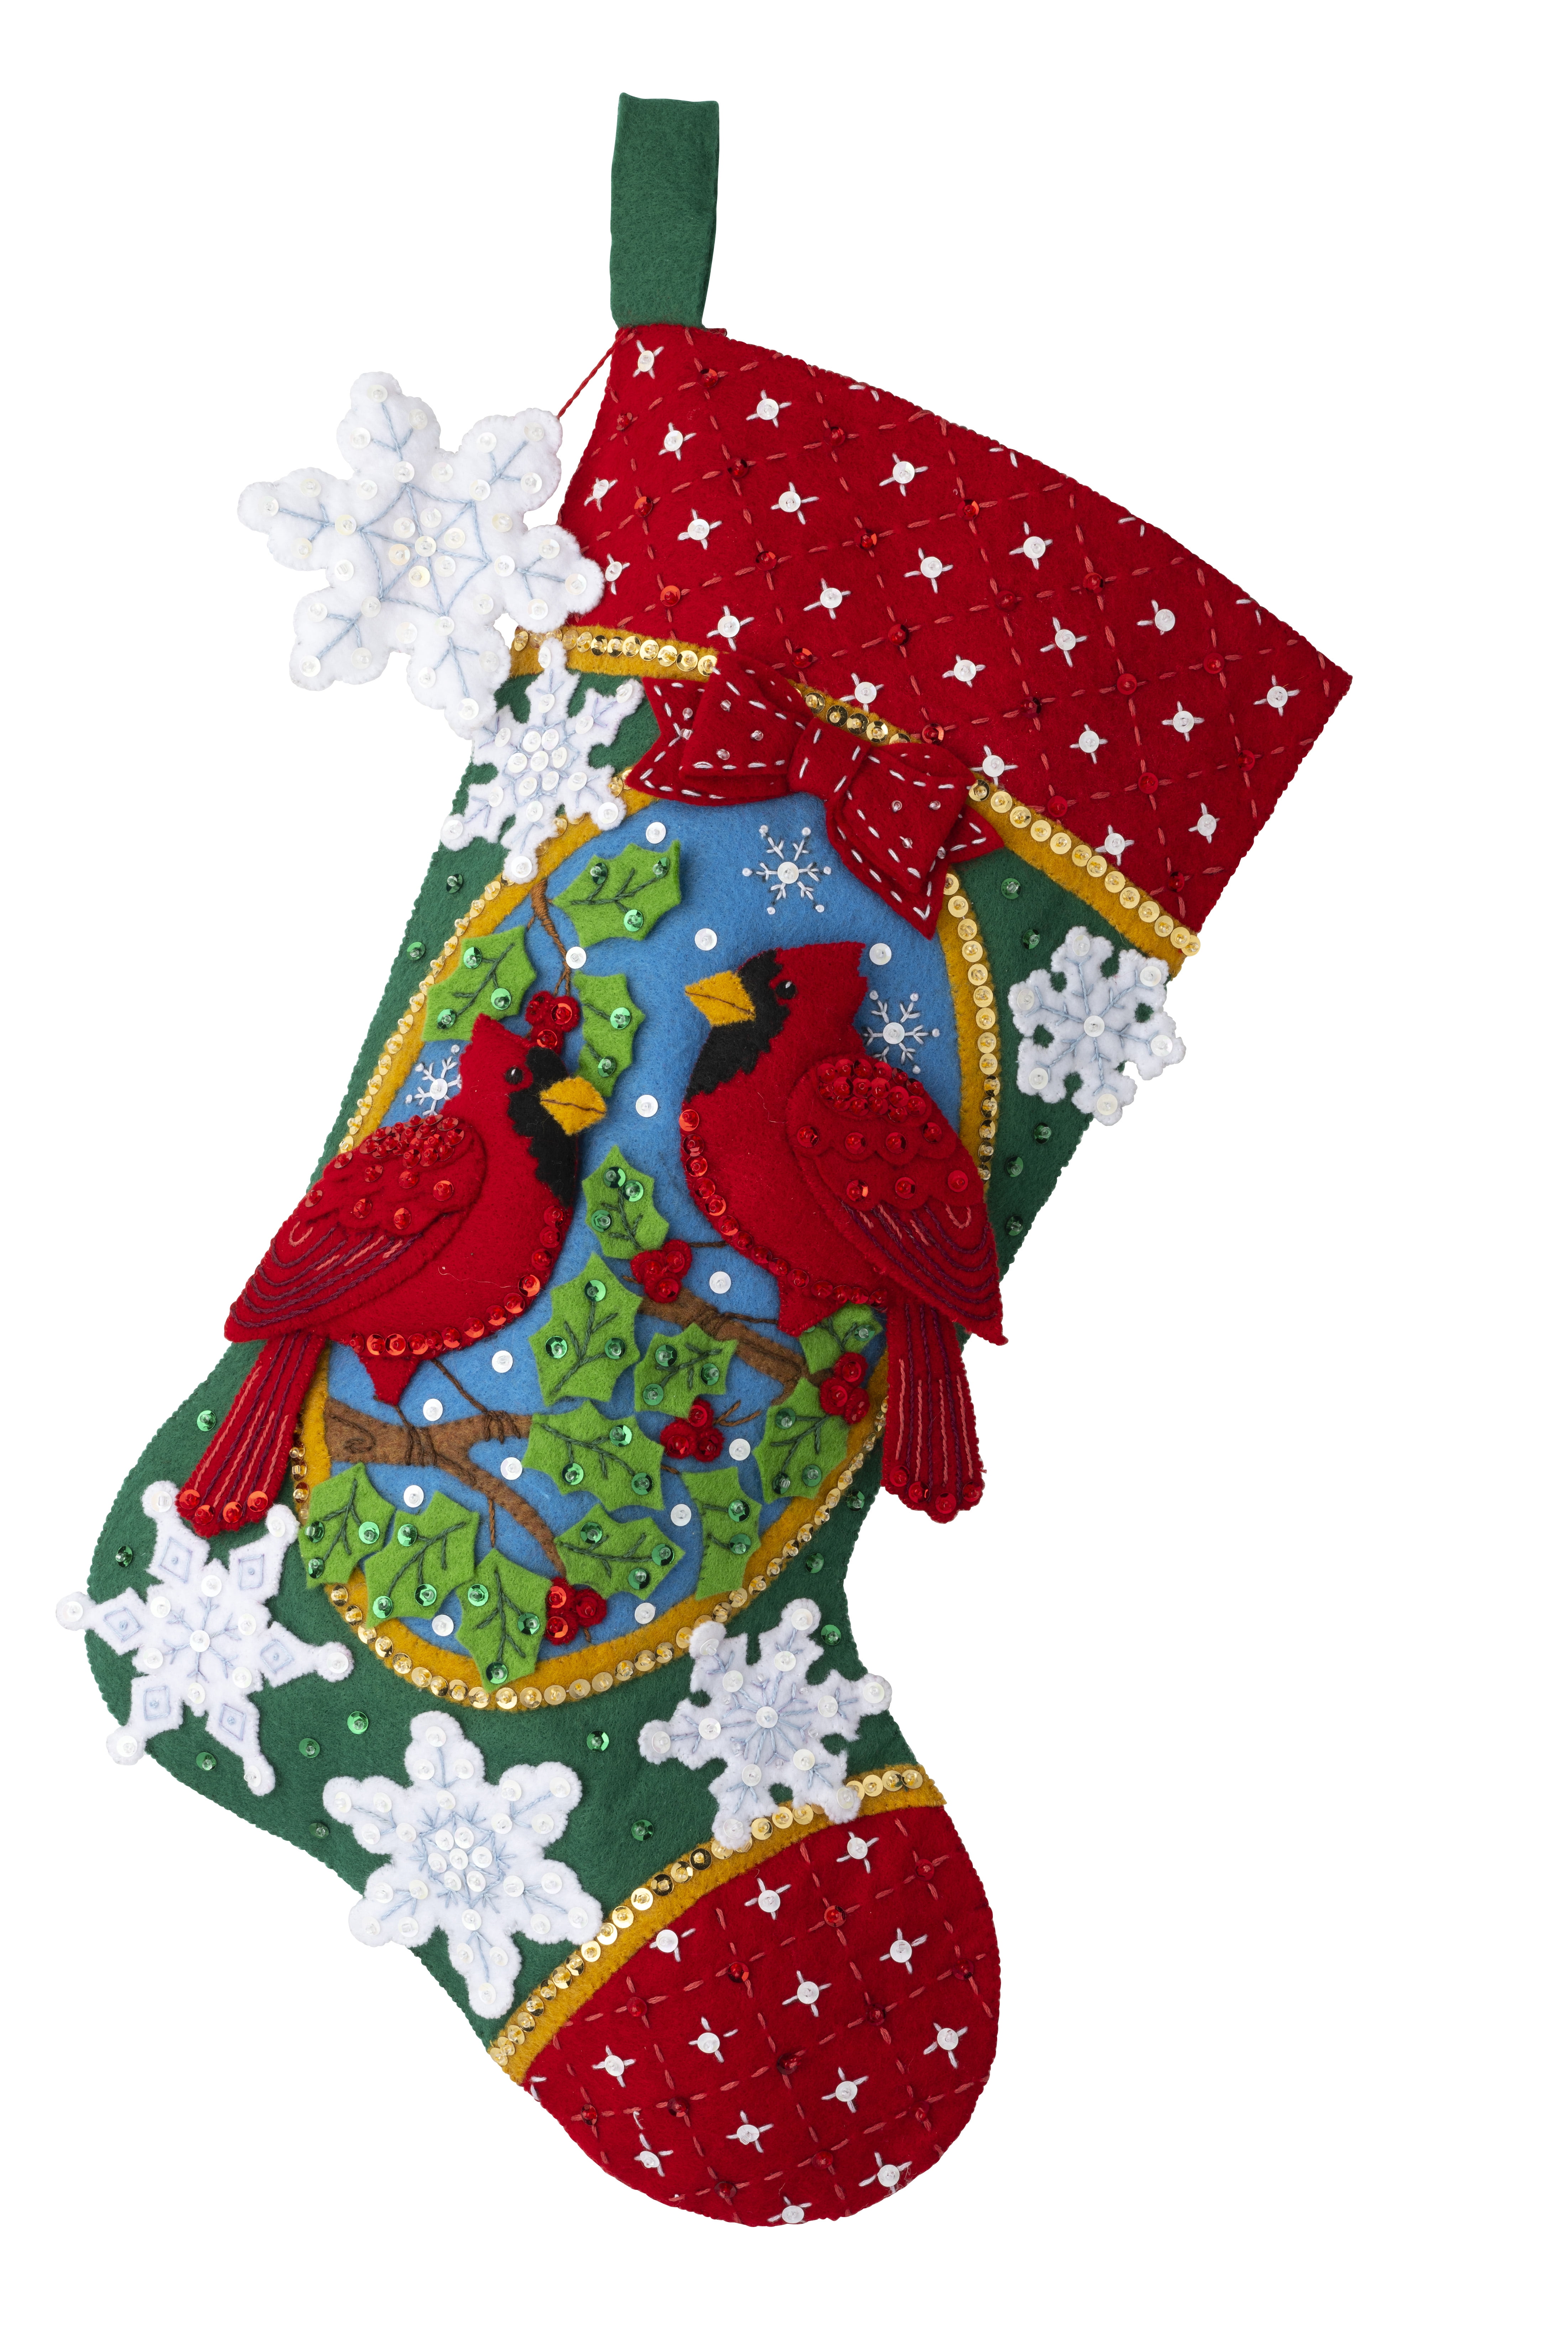 Bucilla Felt Applique 18 Stocking Making Kit, Classic Christmas, Perfect  for DIY Arts and Crafts, 89532E